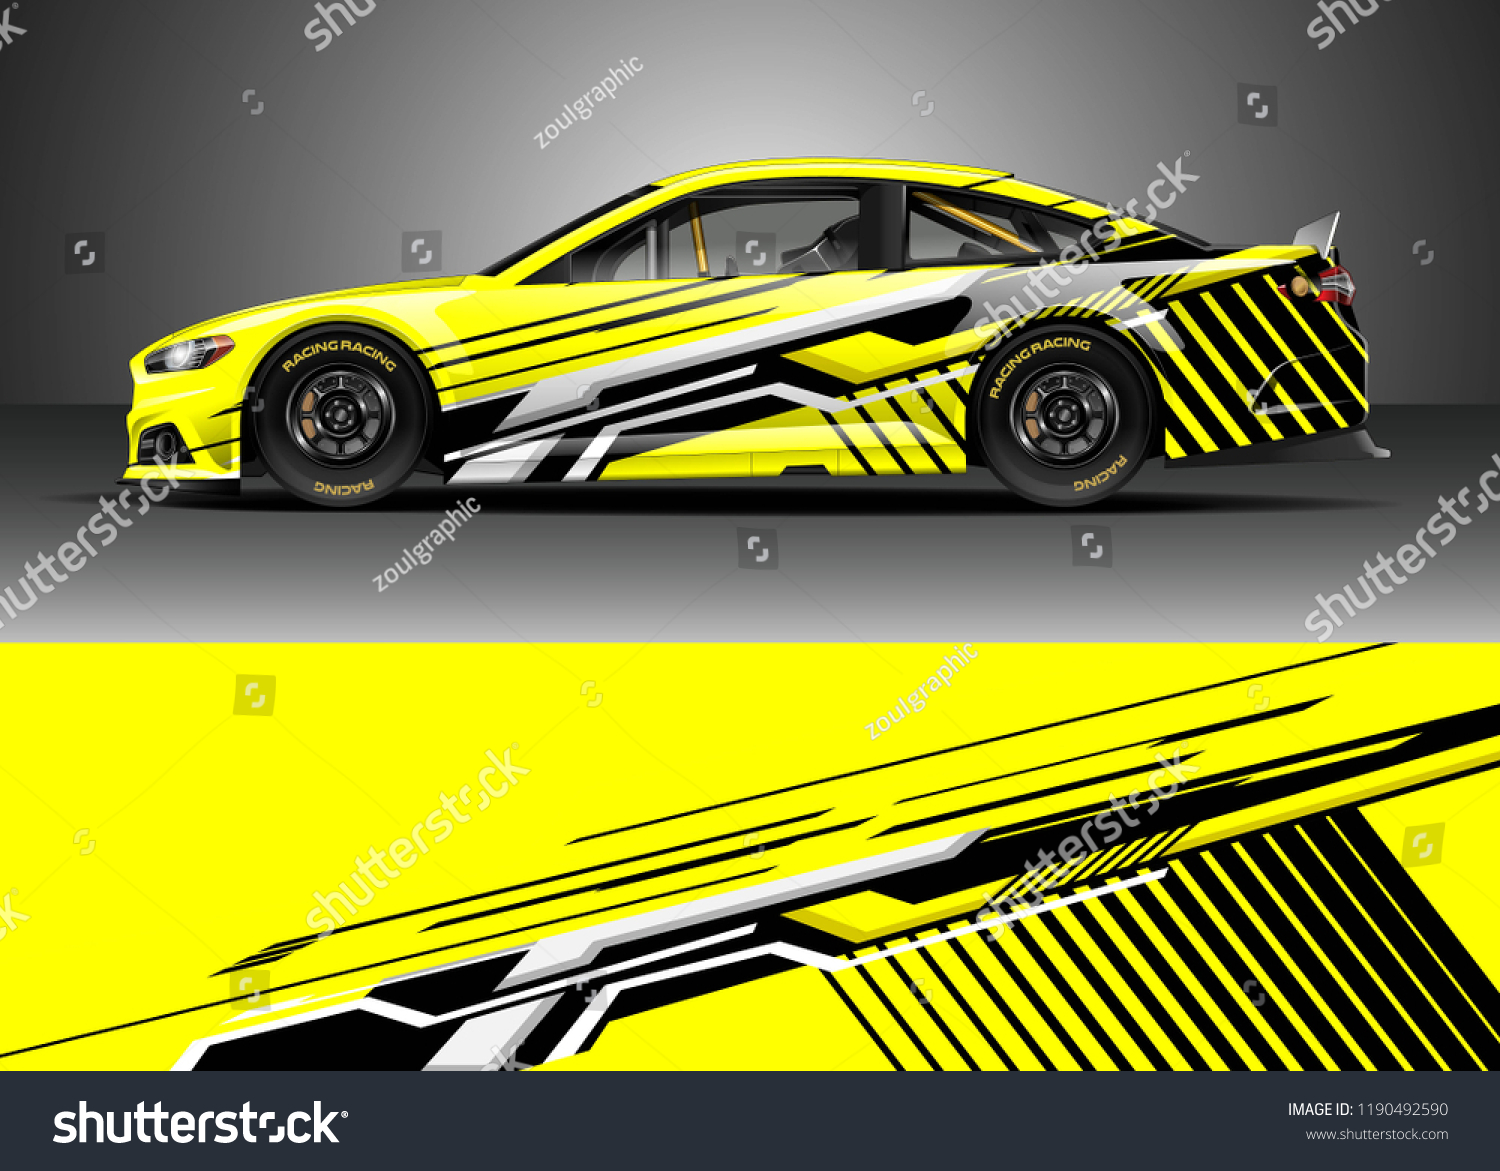 Car Decal Wrap Design Vector Graphic Stock Vector Royalty Free 1190492590,New Latest Indian Dress Designs